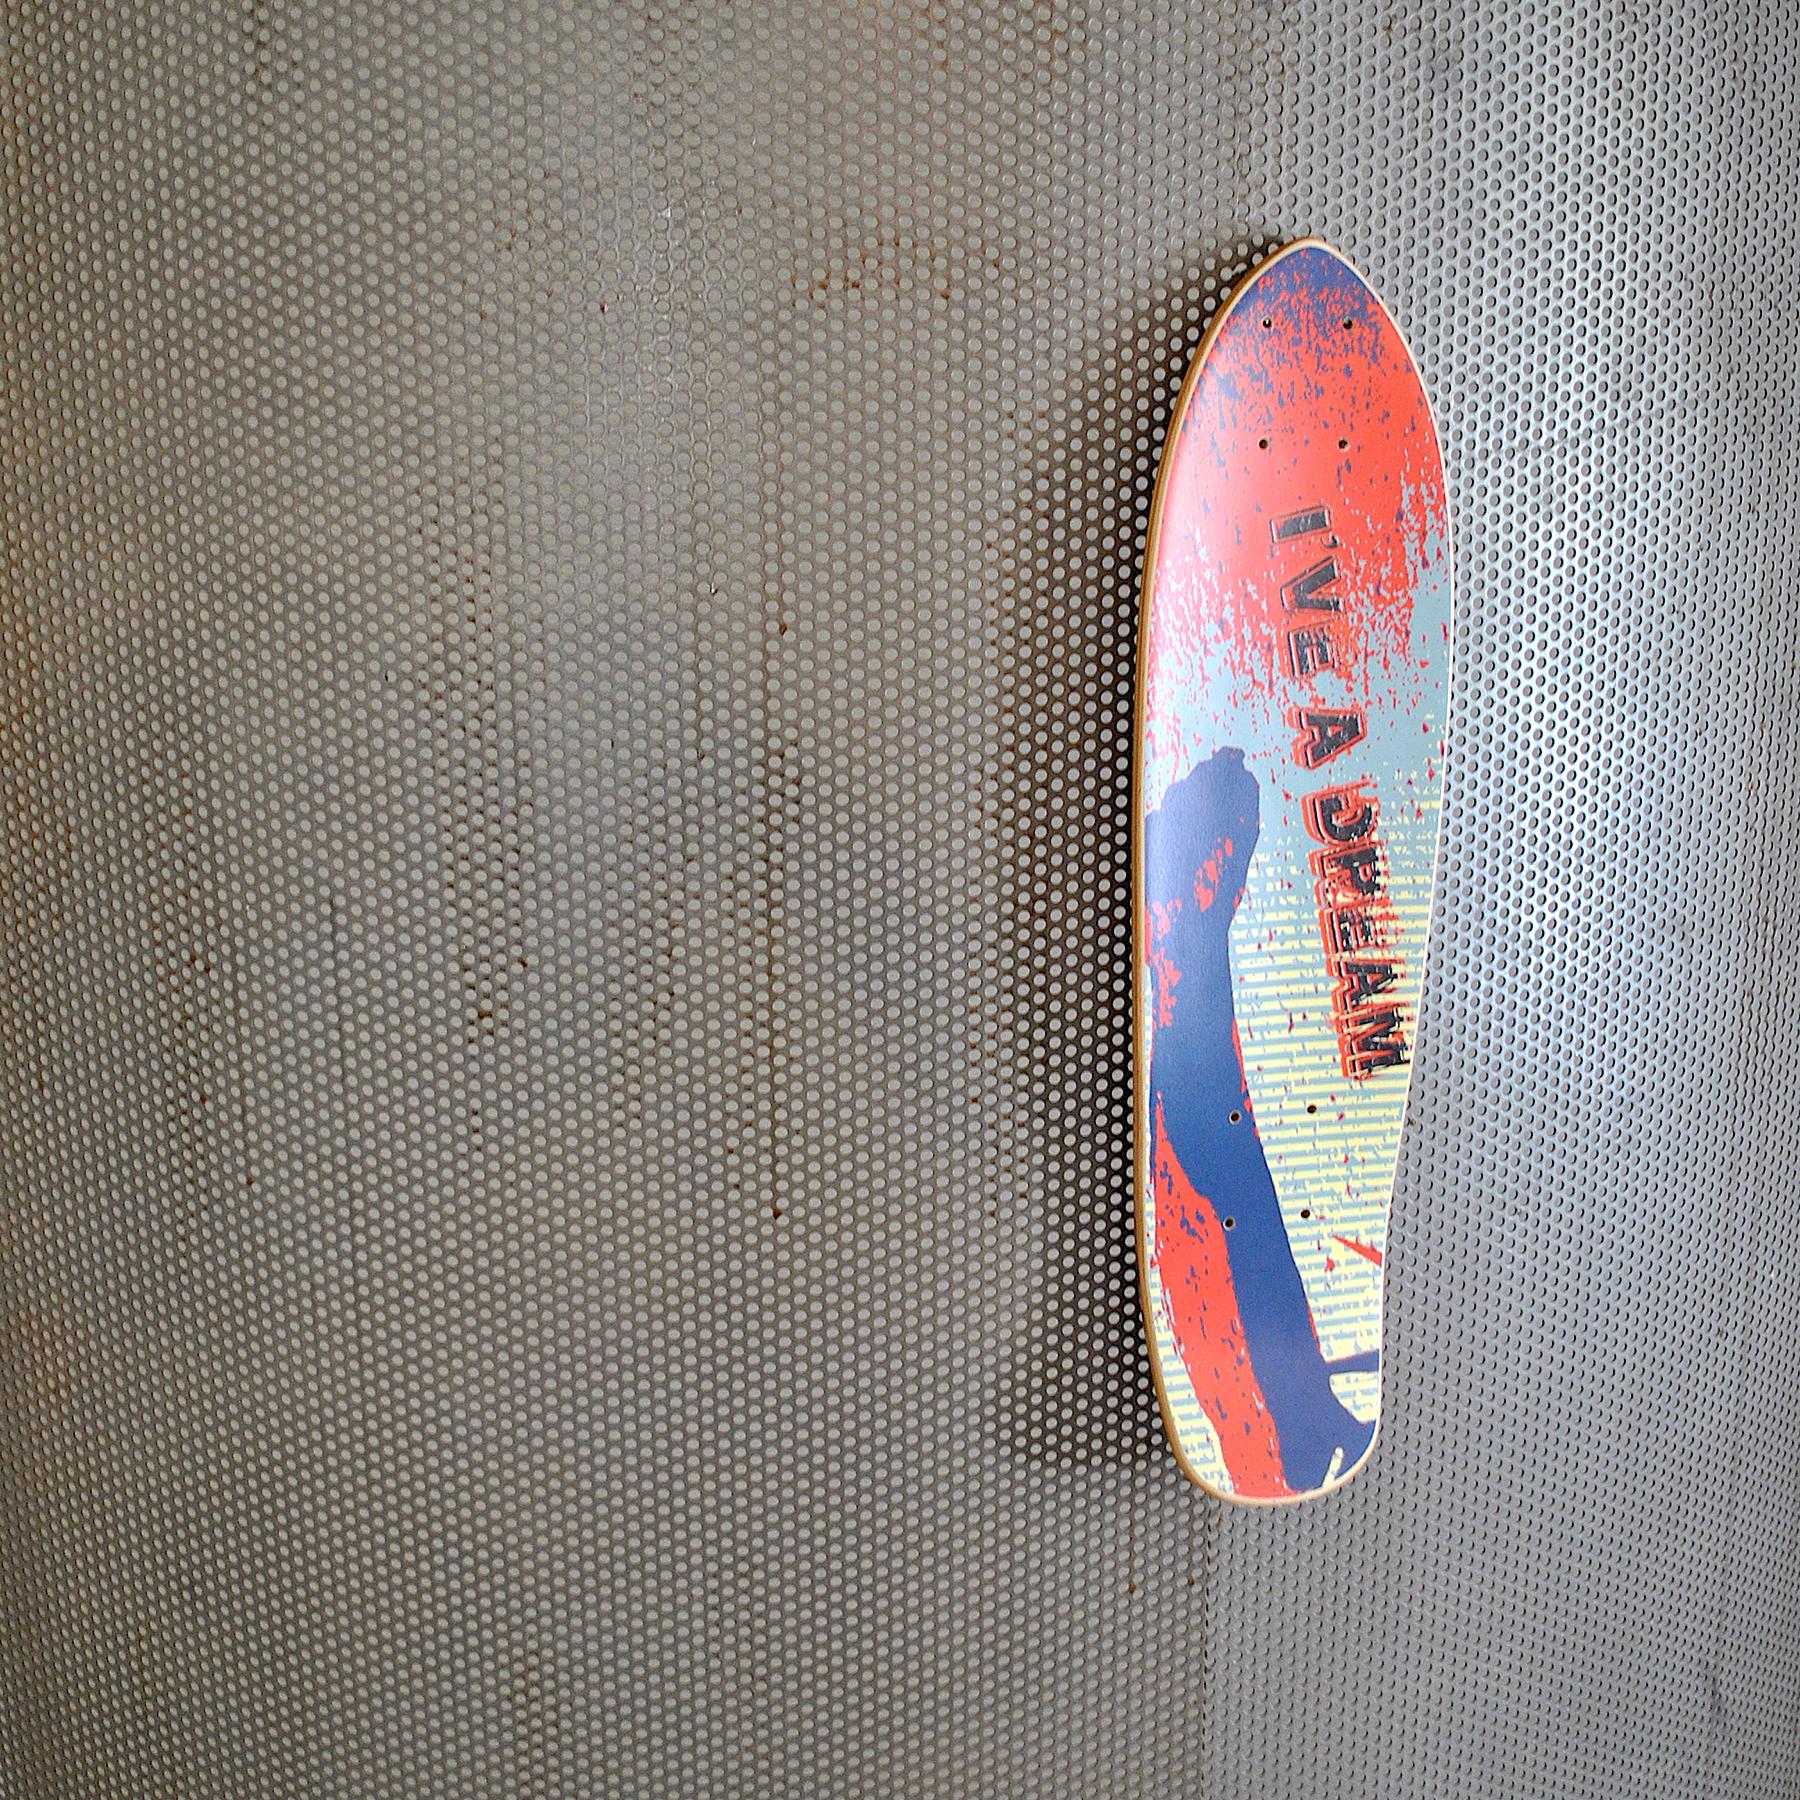 Pio Schena skateboard deck
Title: I'have a dream
Limited edition of 10 pcs.
Archival print on cold pressed steep natural skate deck – Handmade
Consisting of 5 layers in beech and two layers in maple.